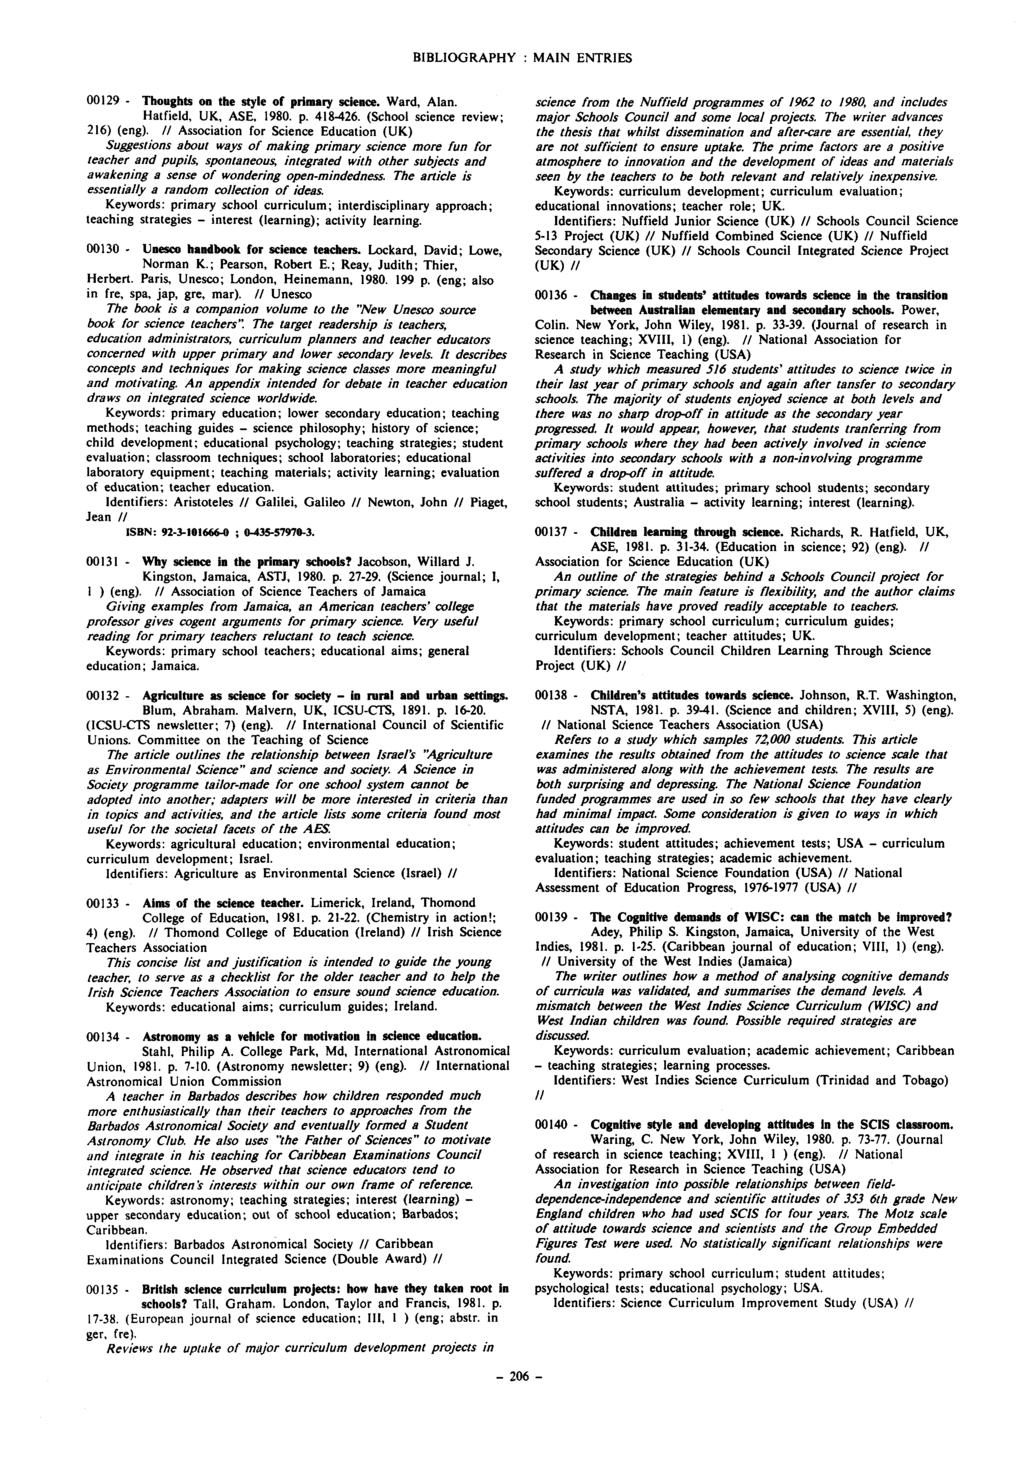 BIBLIOGRAPHY MAIN ENTRIES 00129 - Thoughts on the style of primary science. Ward, Alan. Hatfield, UK, ASE, 1980. p. 418-426. (School science review; 216) (eng).